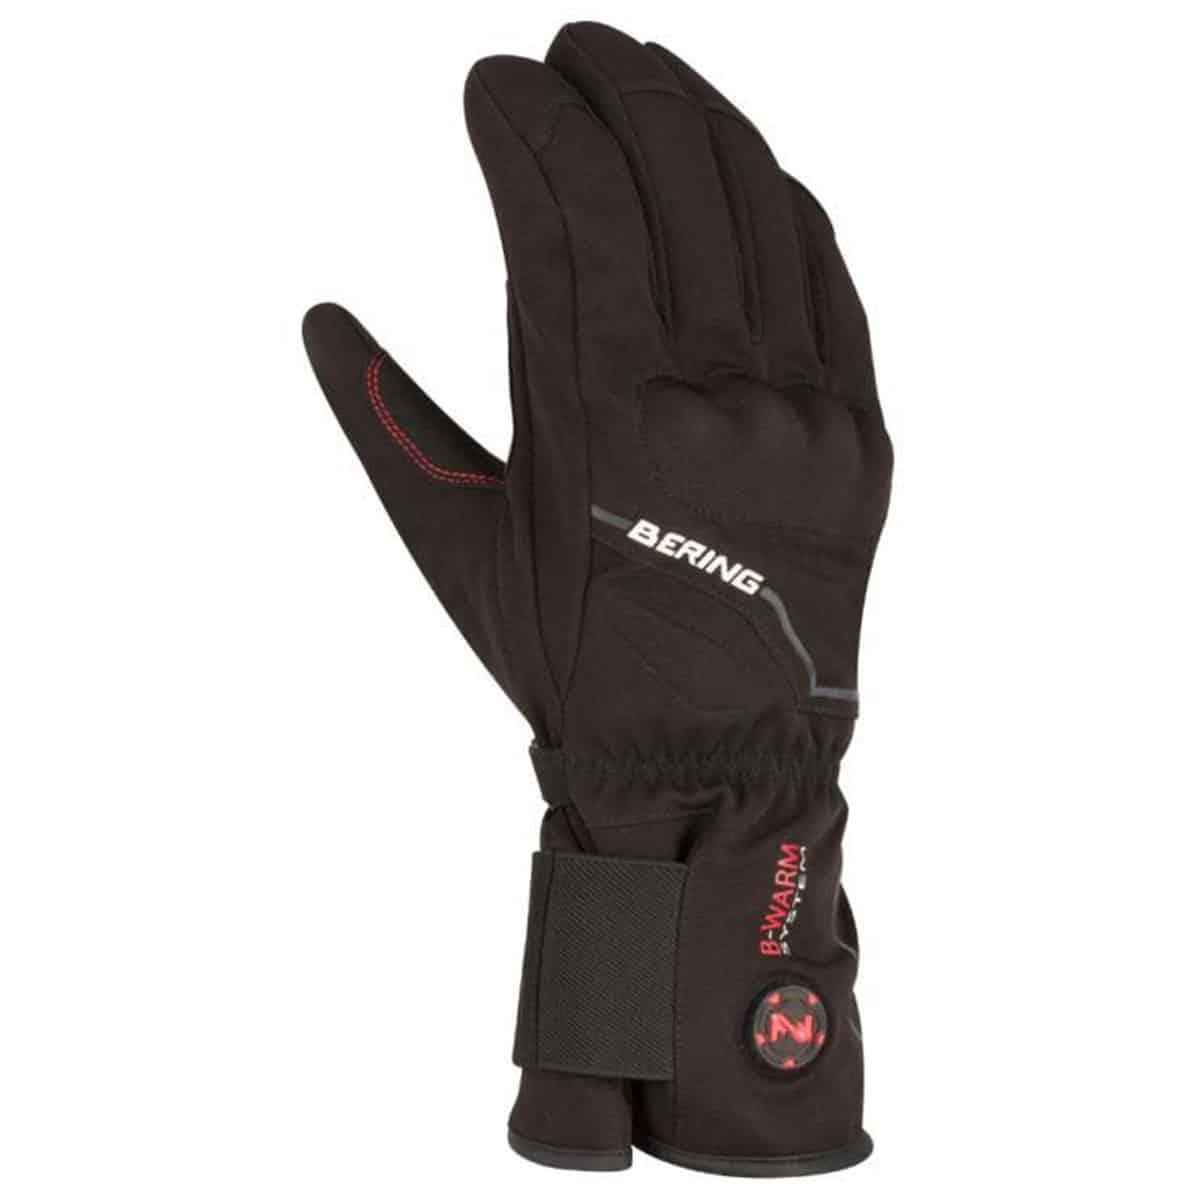 Bering Breva Heated Gloves - Black - Browse our range of Gloves: Heated - getgearedshop Bering heated motorcycle glove, complete with batteries